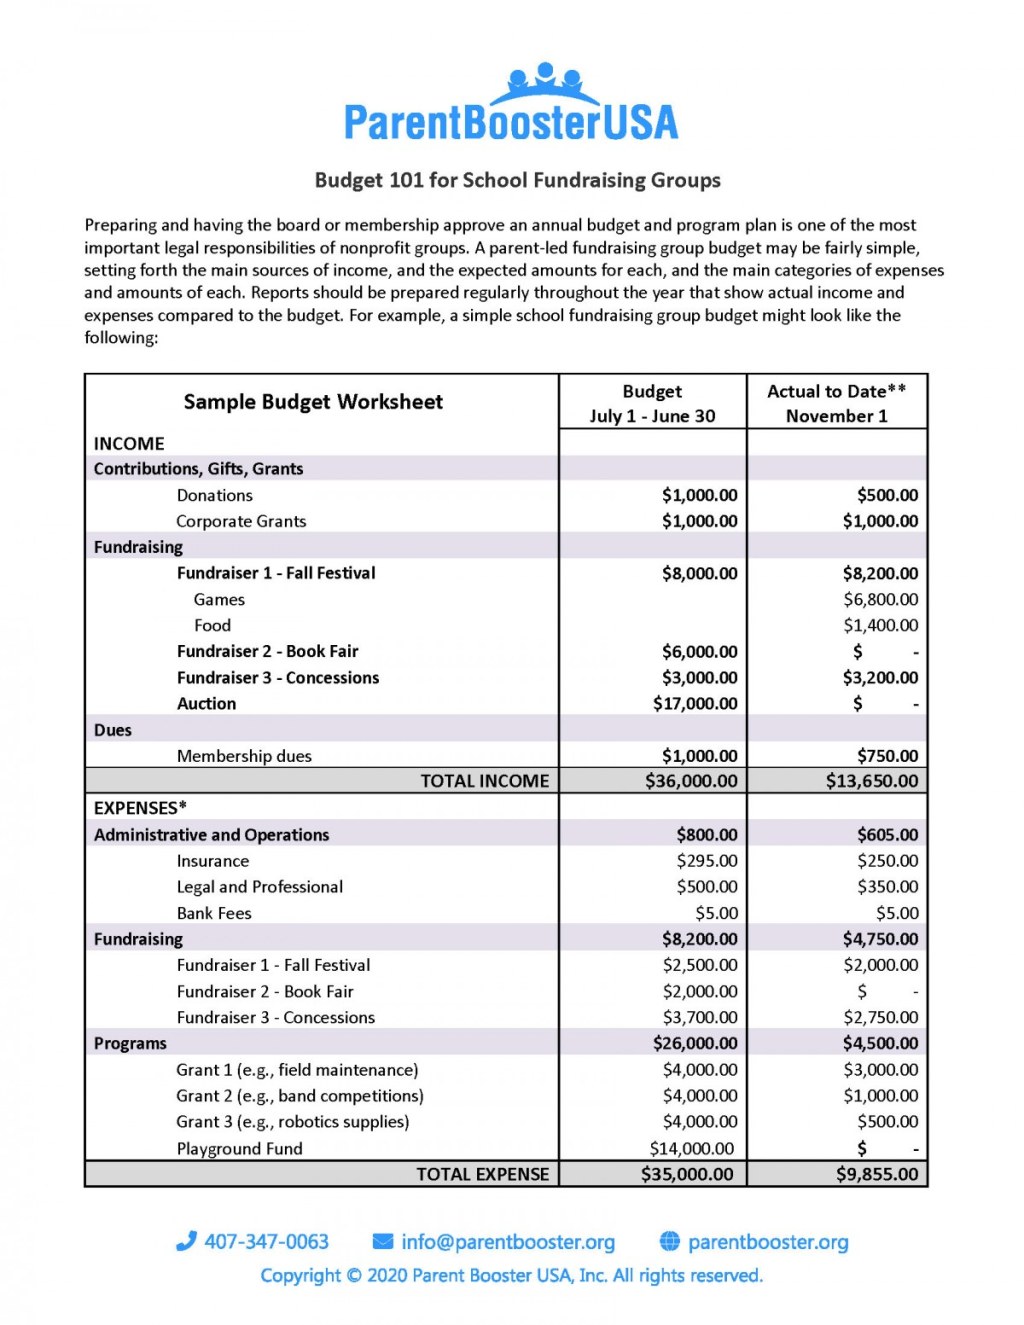 budgeting 101 template - Booster Club Budgeting   Parent Booster USA